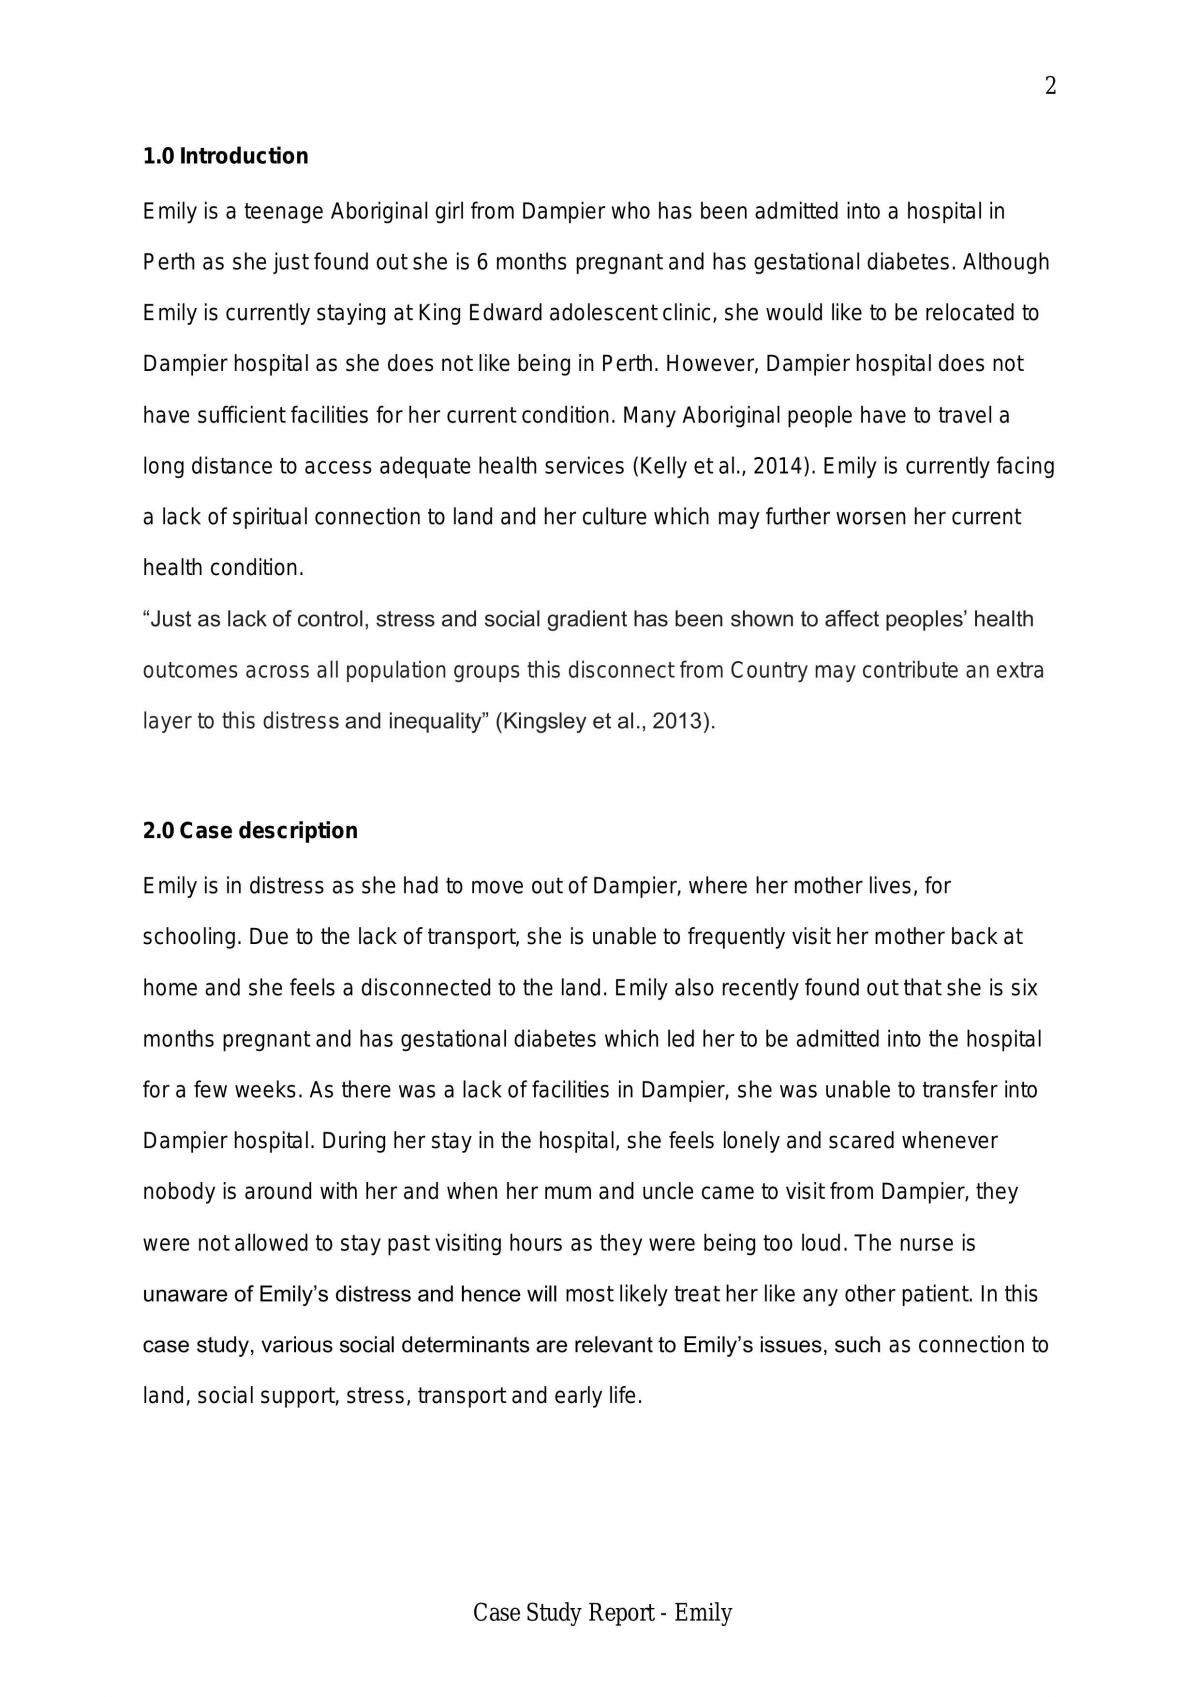 Emily Case Study  - Page 2